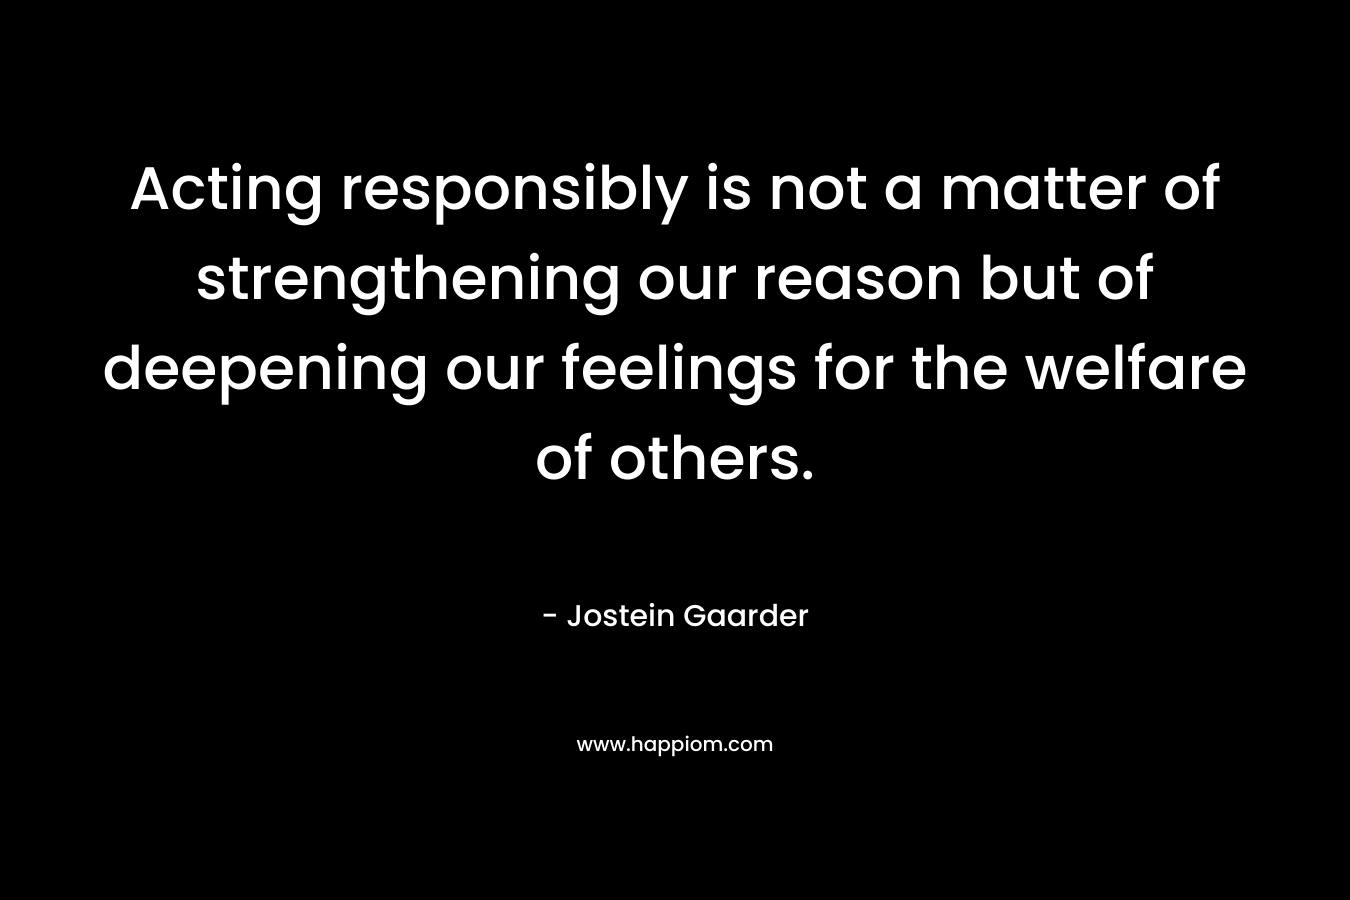 Acting responsibly is not a matter of strengthening our reason but of deepening our feelings for the welfare of others. – Jostein Gaarder